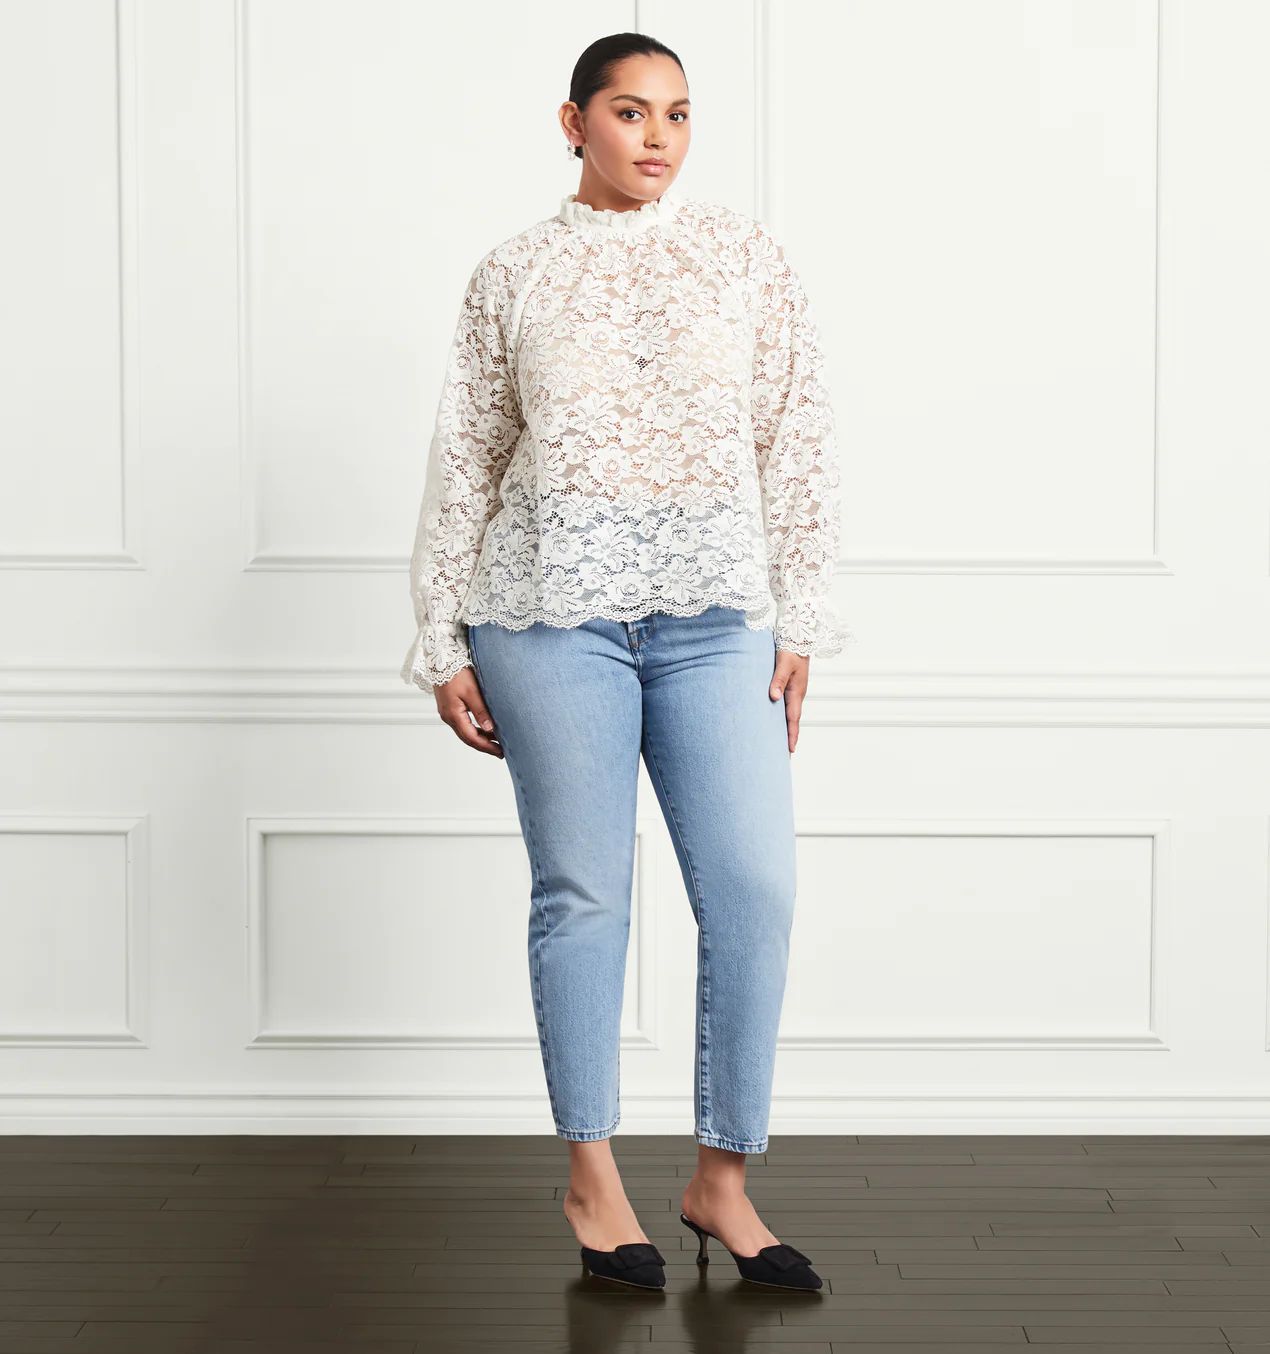 The Millie Top - White Lace | Hill House Home